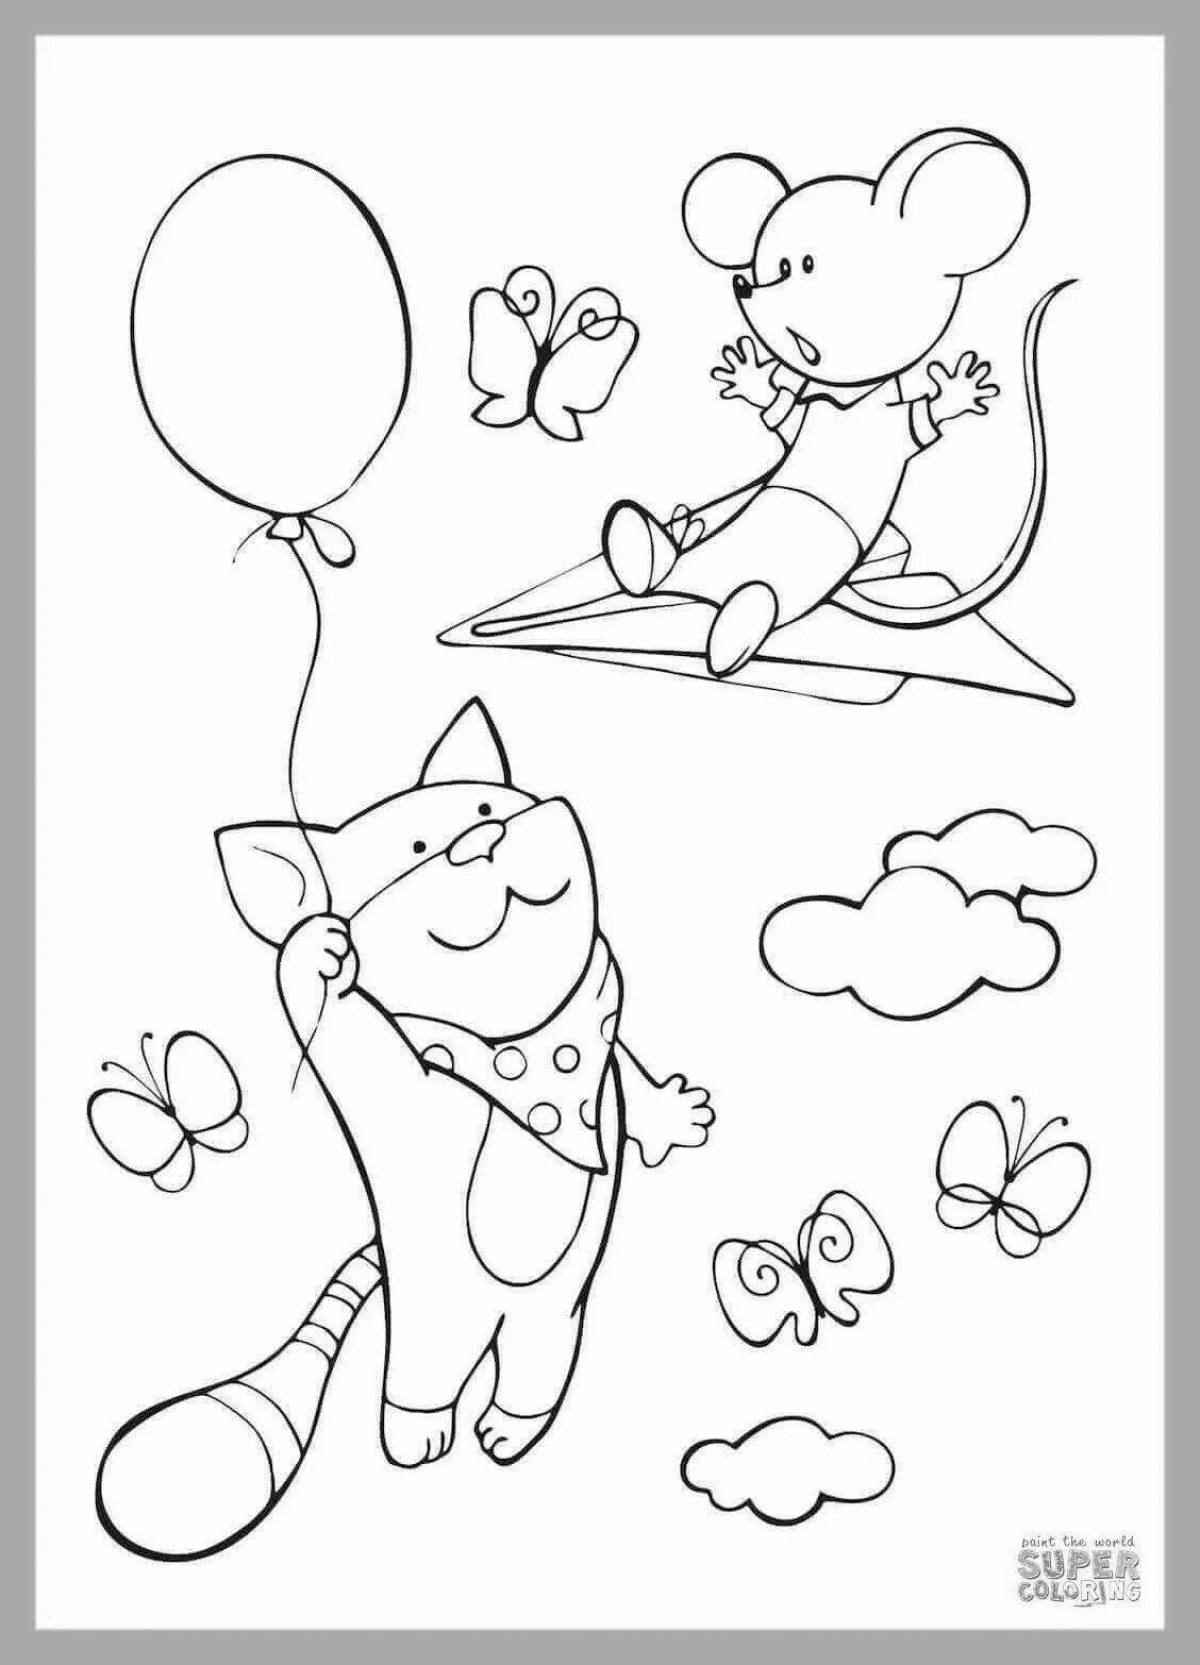 Coloring page dazzling flying cat